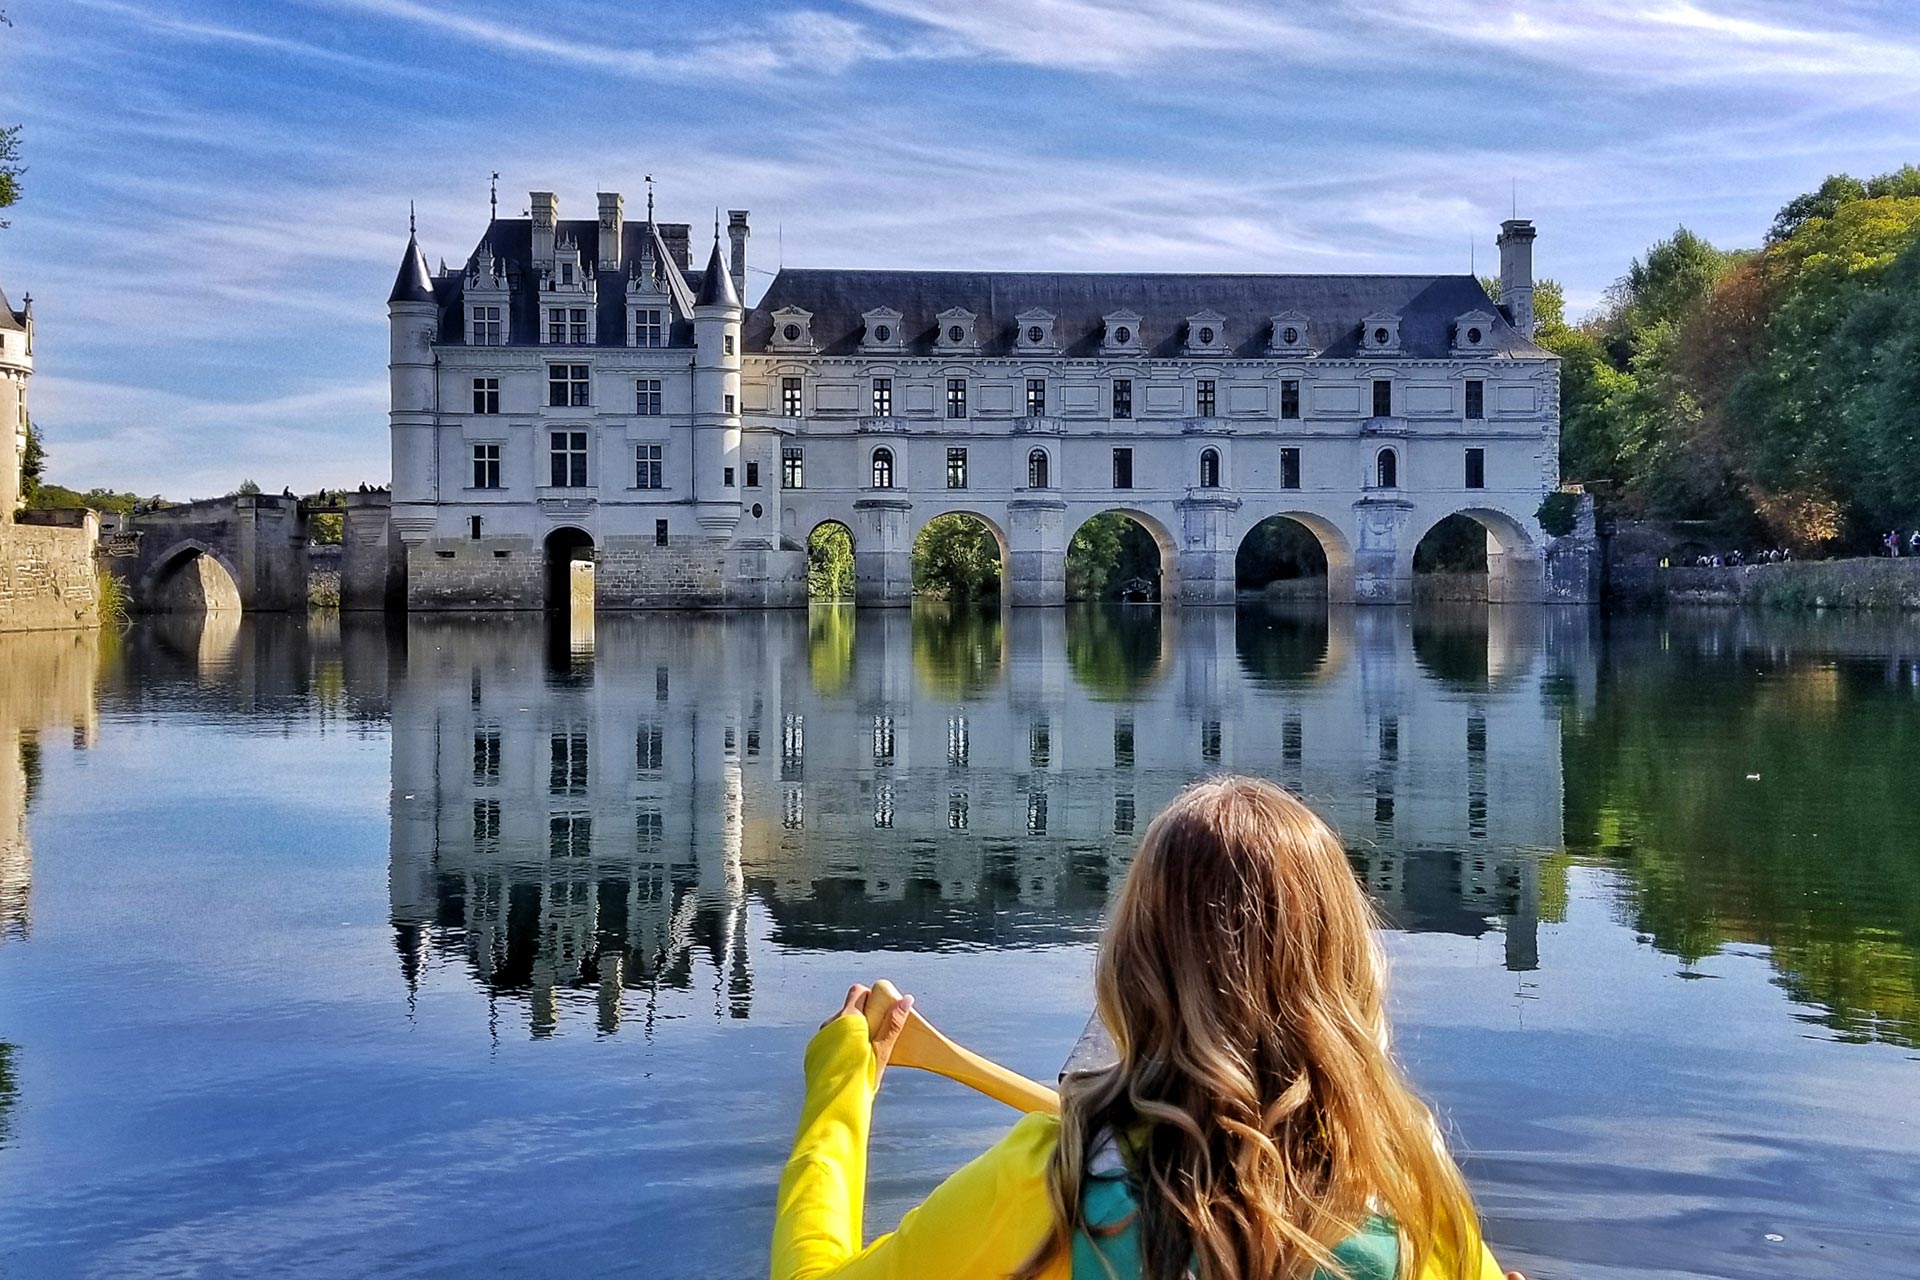 Close to Chenonceau